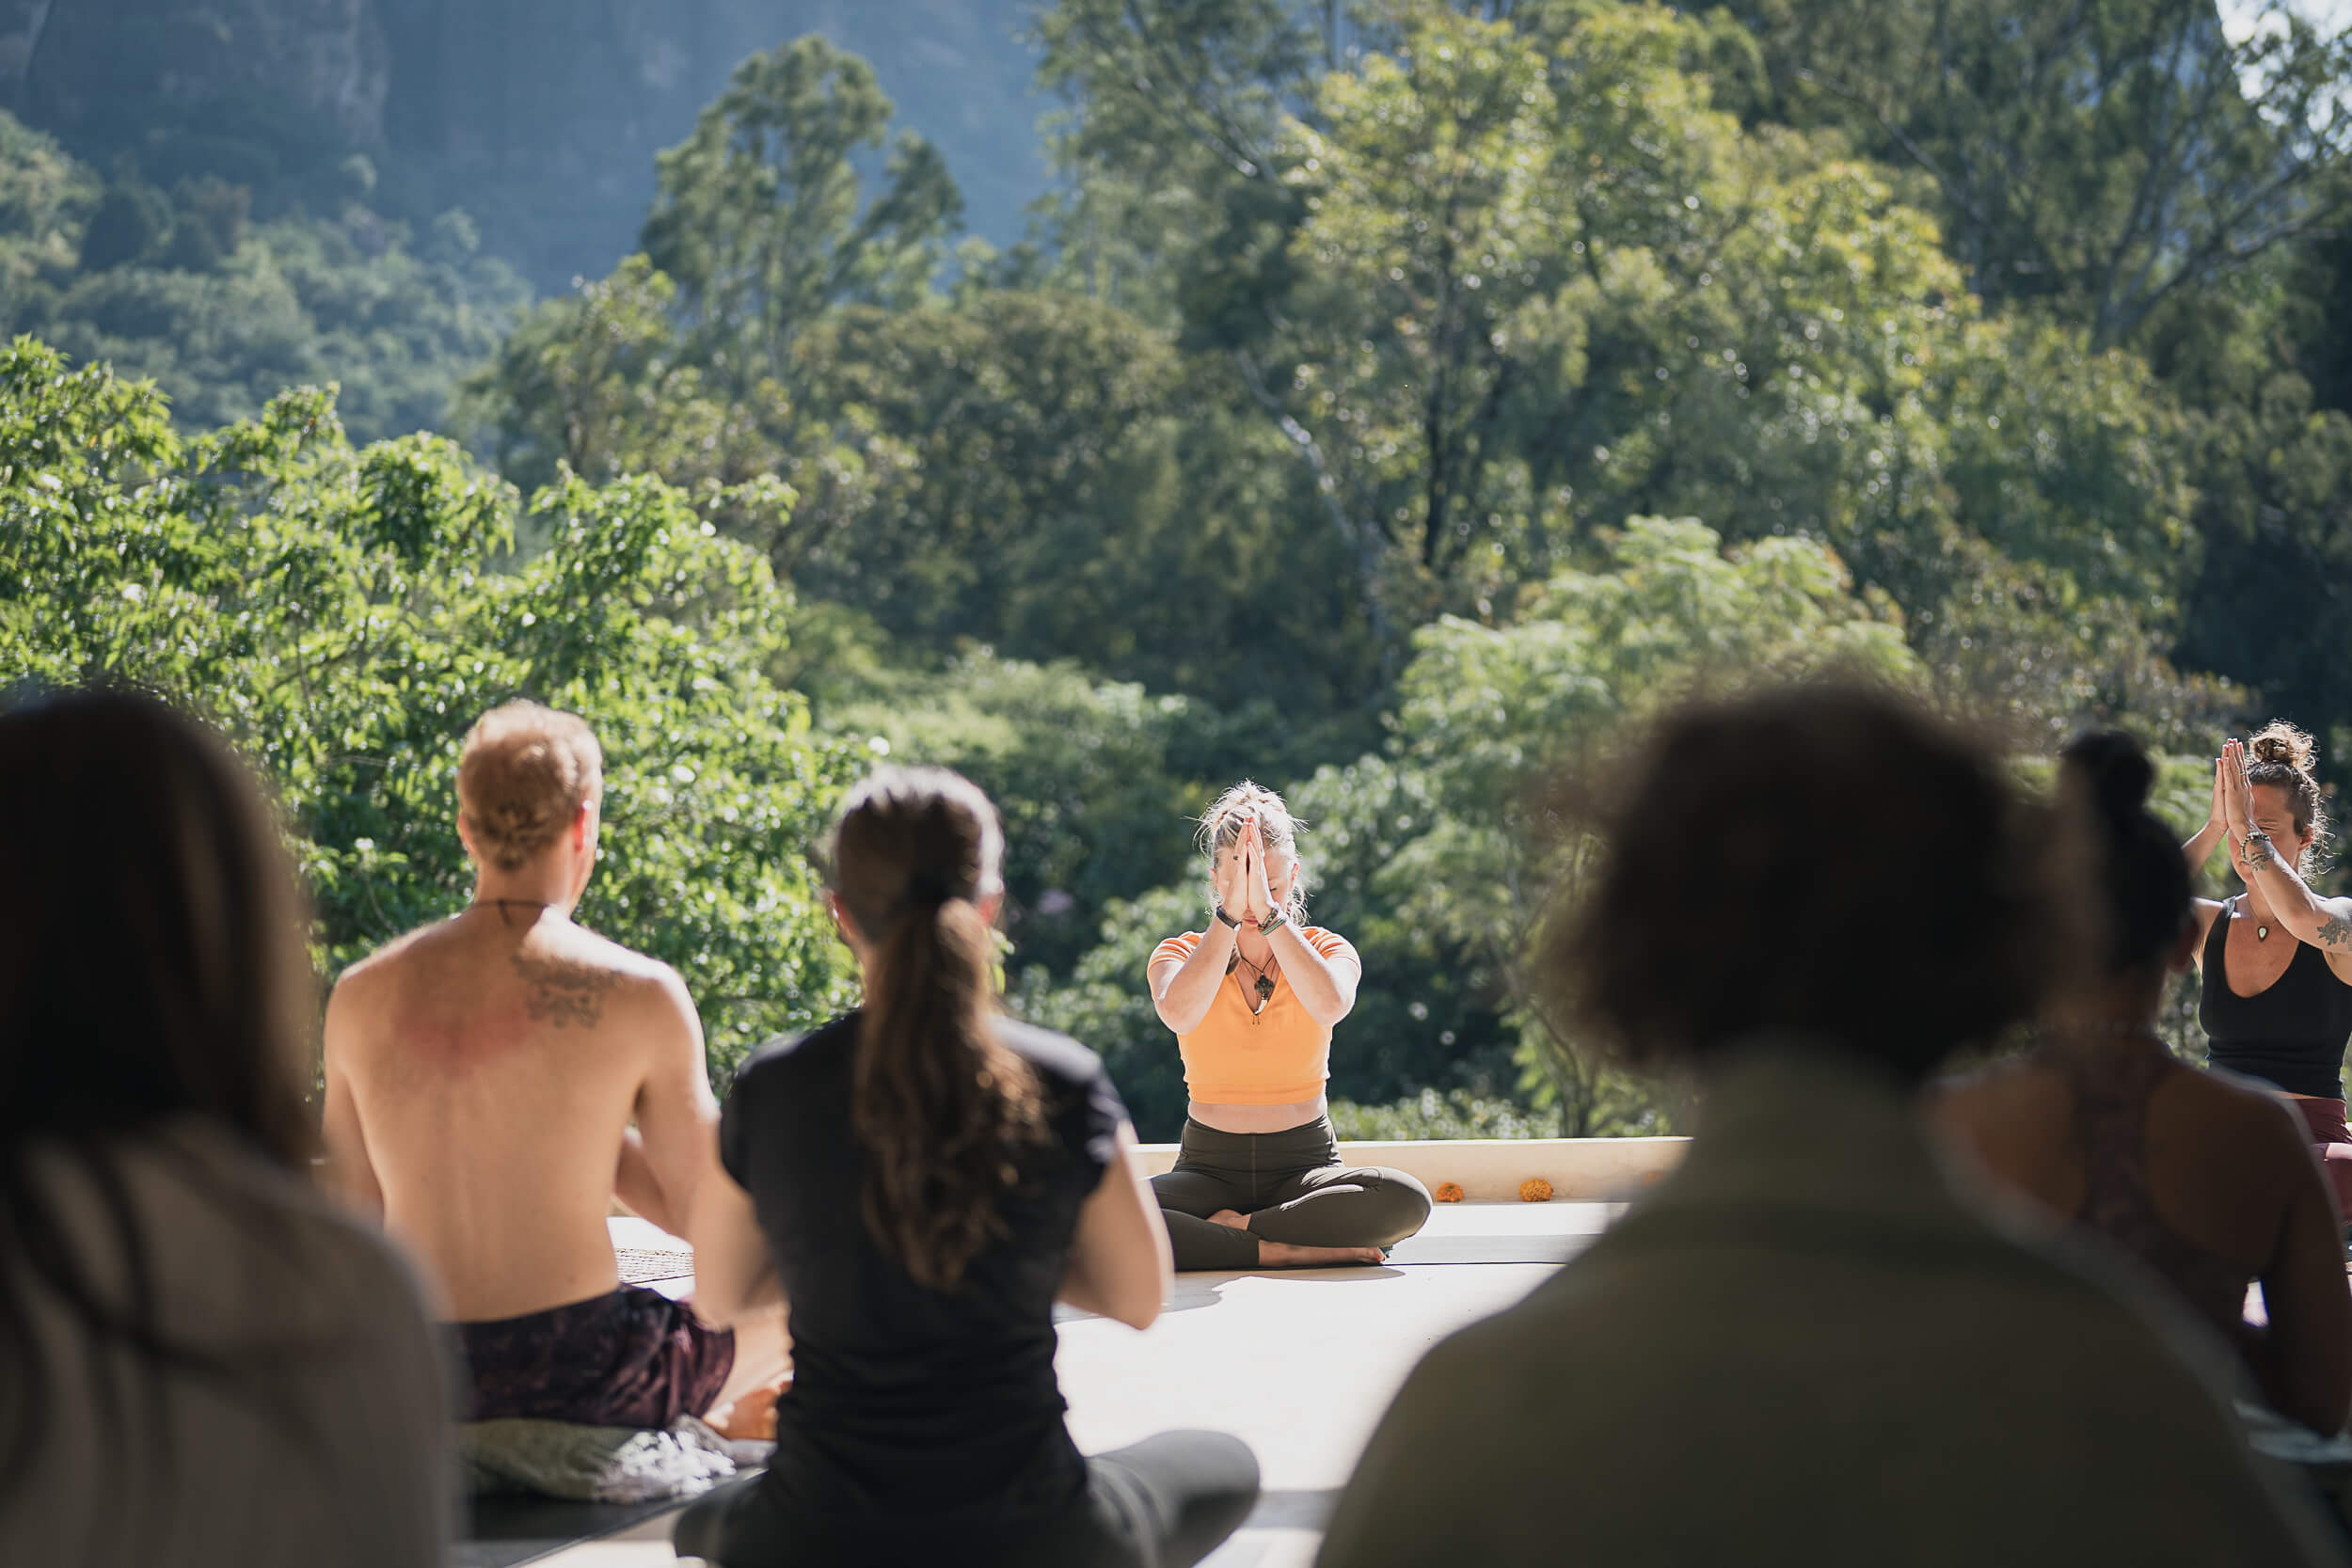 Yoga practitioners in serene Anjali Mudra pose amidst lush Mexican scenery, capturing the essence of tranquility in lifestyle photography by Matt Anthony Photography.